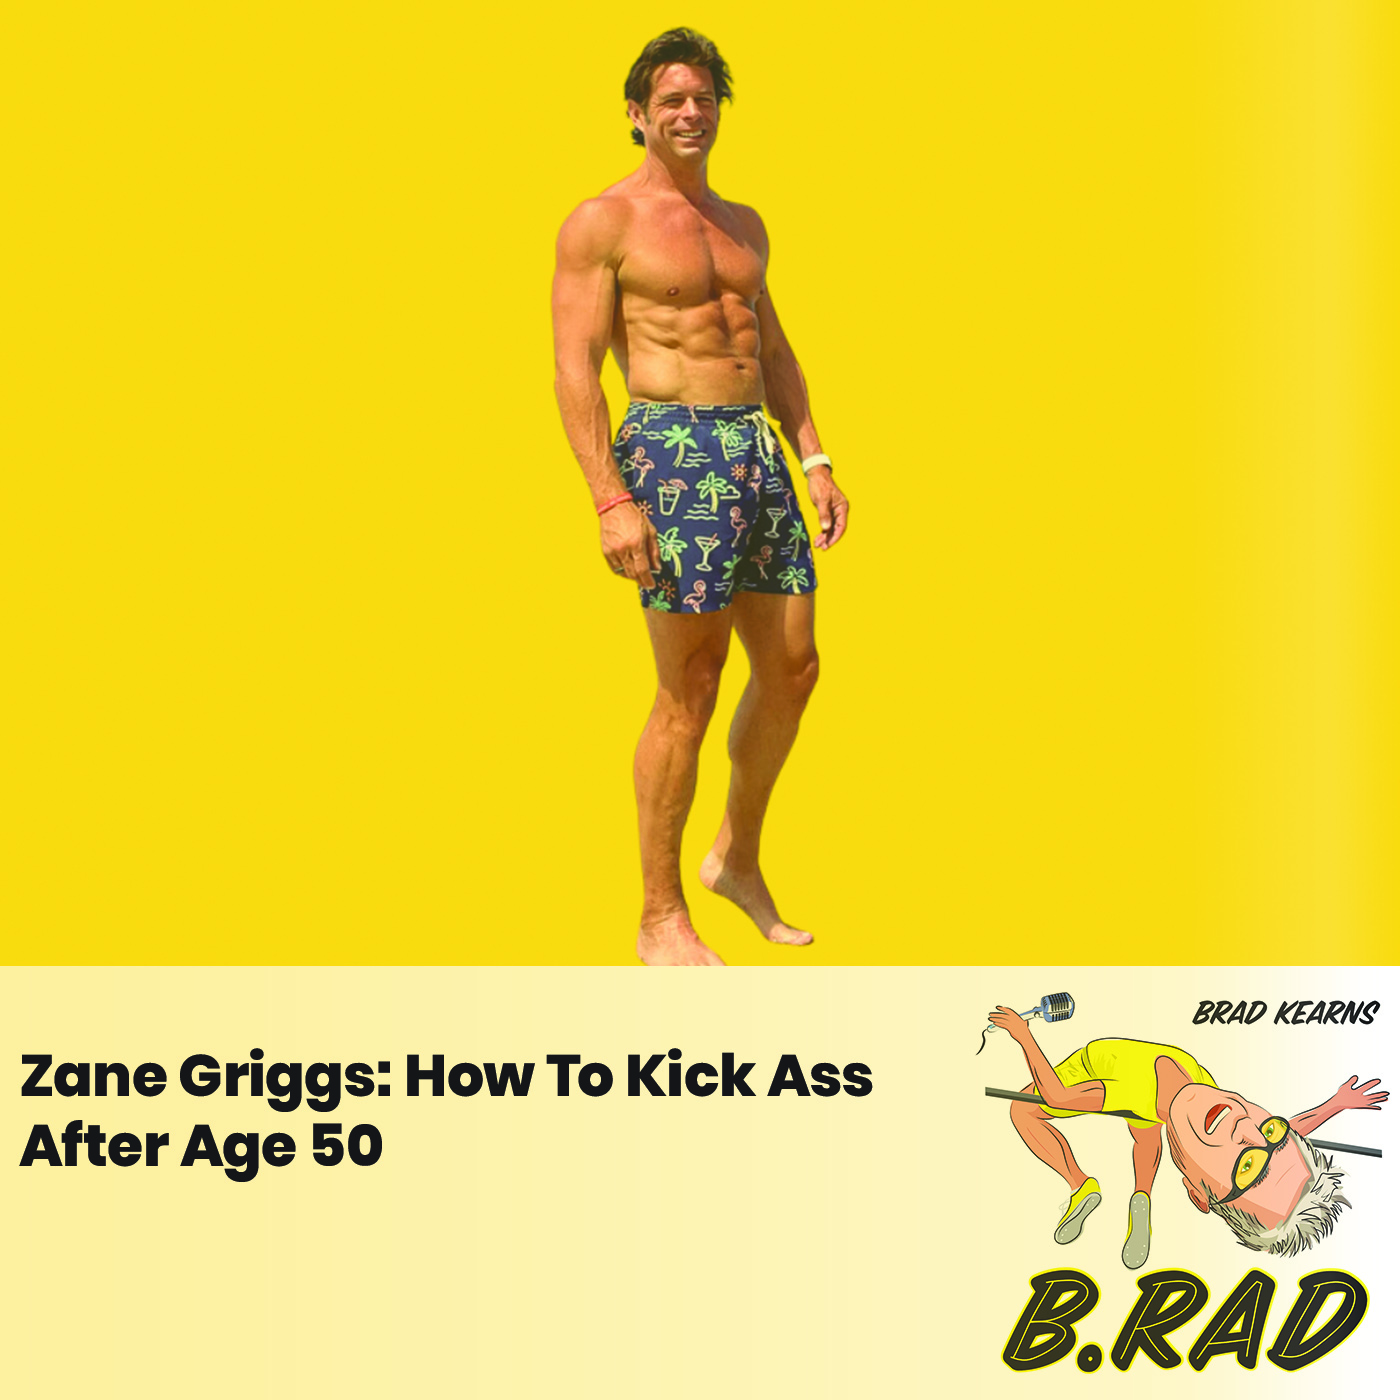 Zane Griggs: How To Kick Ass After Age 50